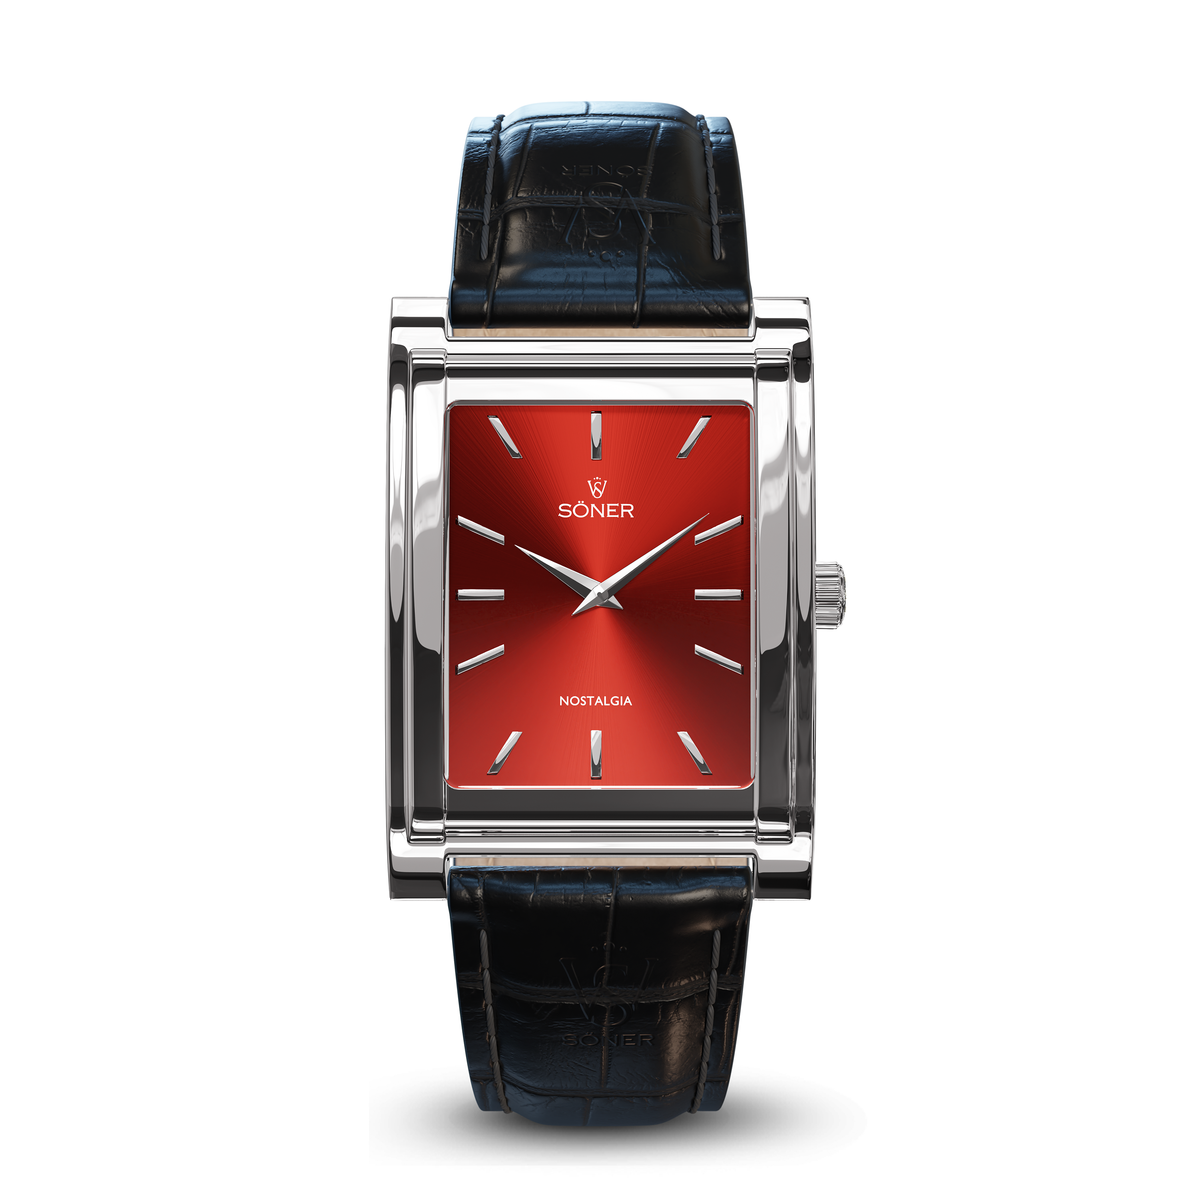 The Rome, a square watch in polished steel with red dial – SÖNER 